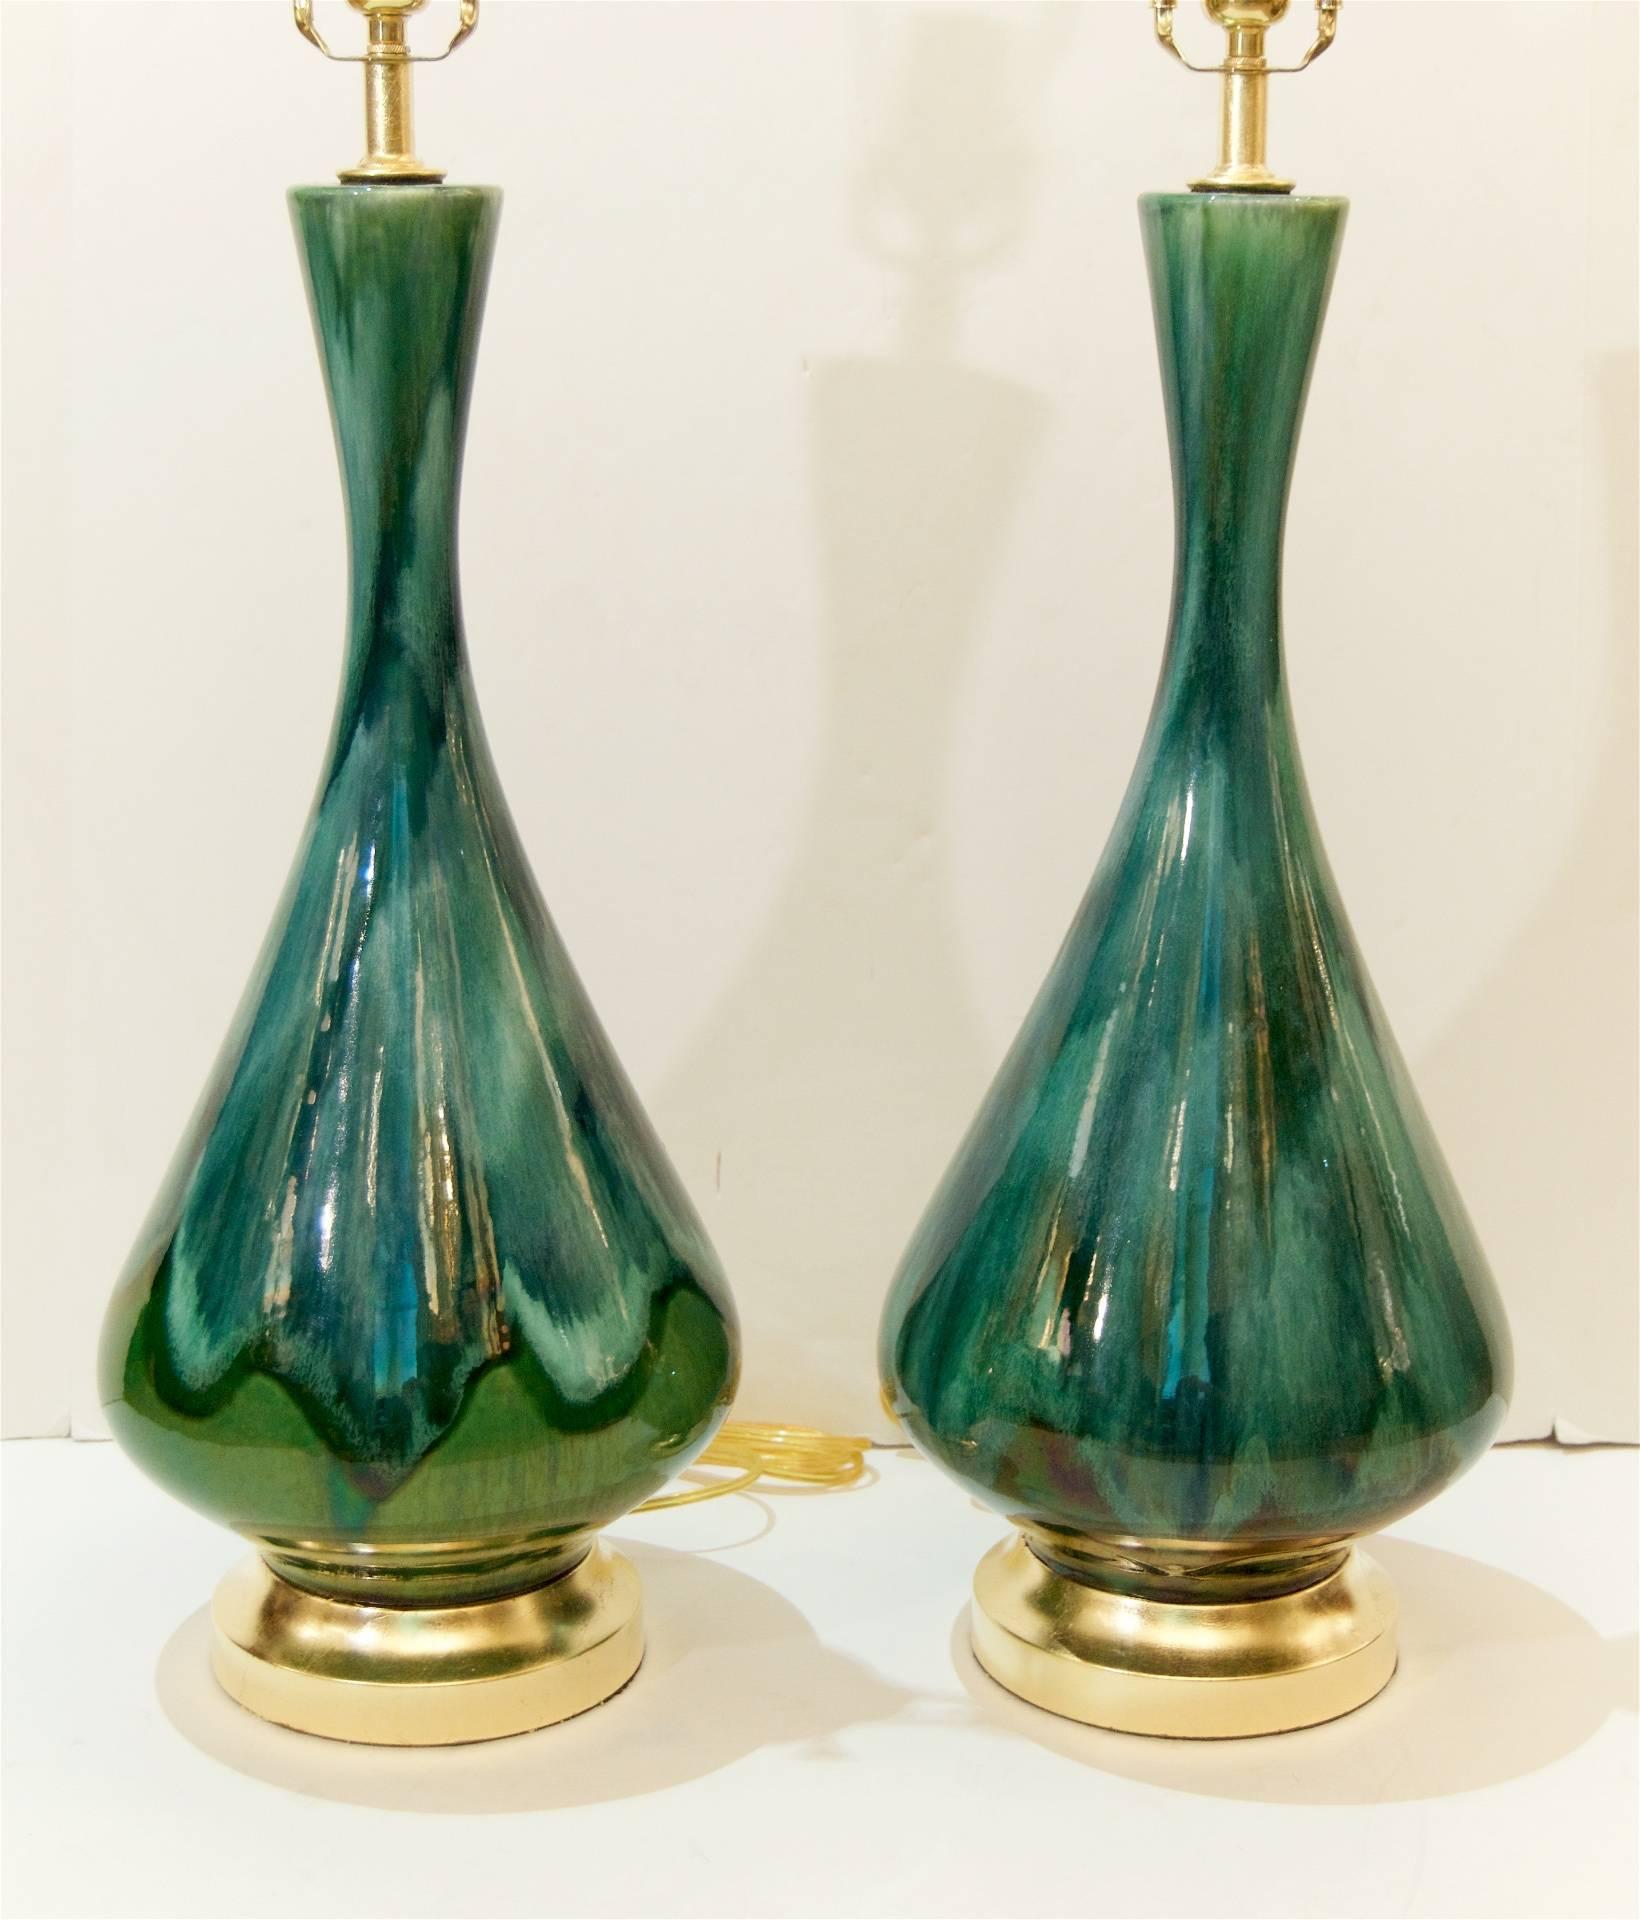 Excellent pair of elegantly formed Mid-Century glazed ceramic lamps with gilt hardware possibly by Royal Haeger.

New wiring. Lamp shades are for display purposes only and are not included.

Overall height to the top of the harp using 11